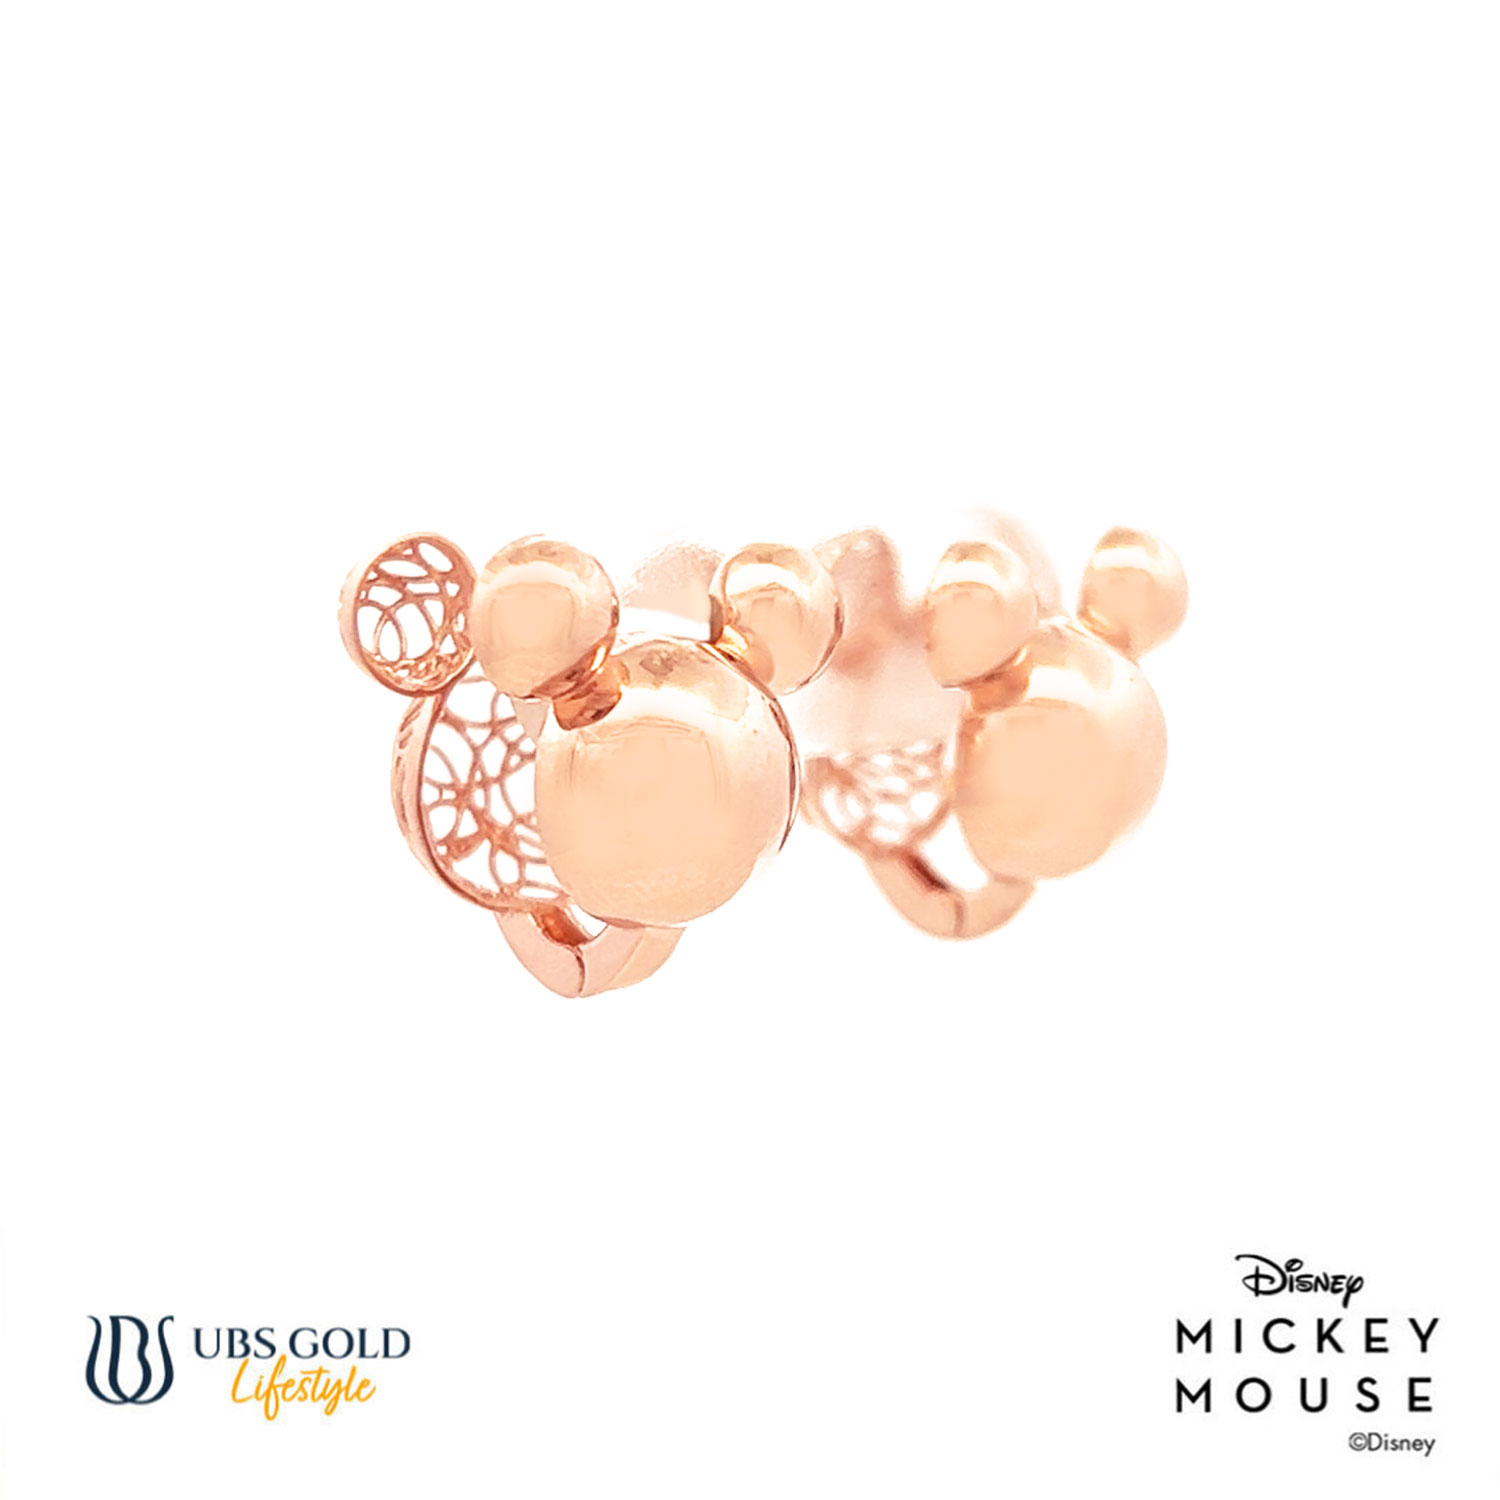 UBS Gold Anting Emas Disney Mickey Mouse - Cay0025 - 17K